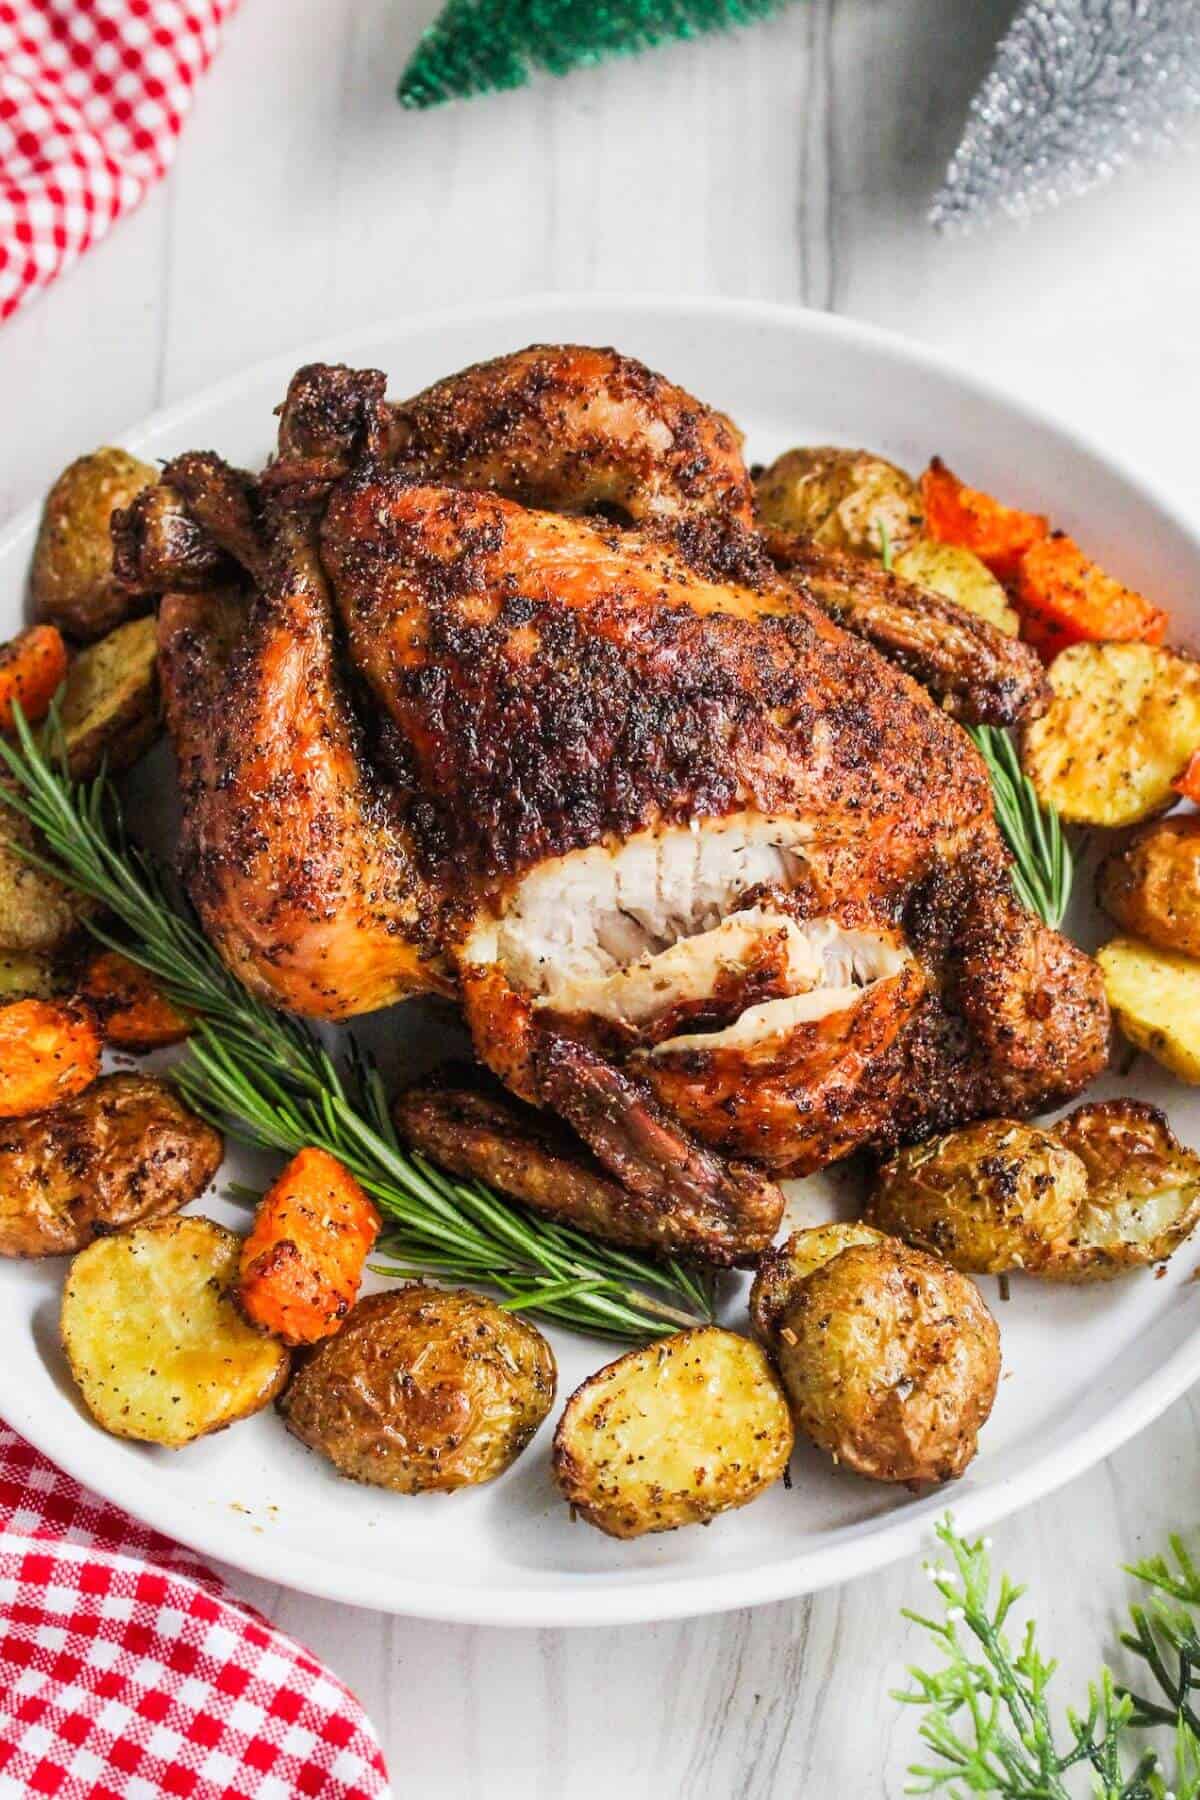 Whole roasted chicken with potatoes and carrots on a white plate.